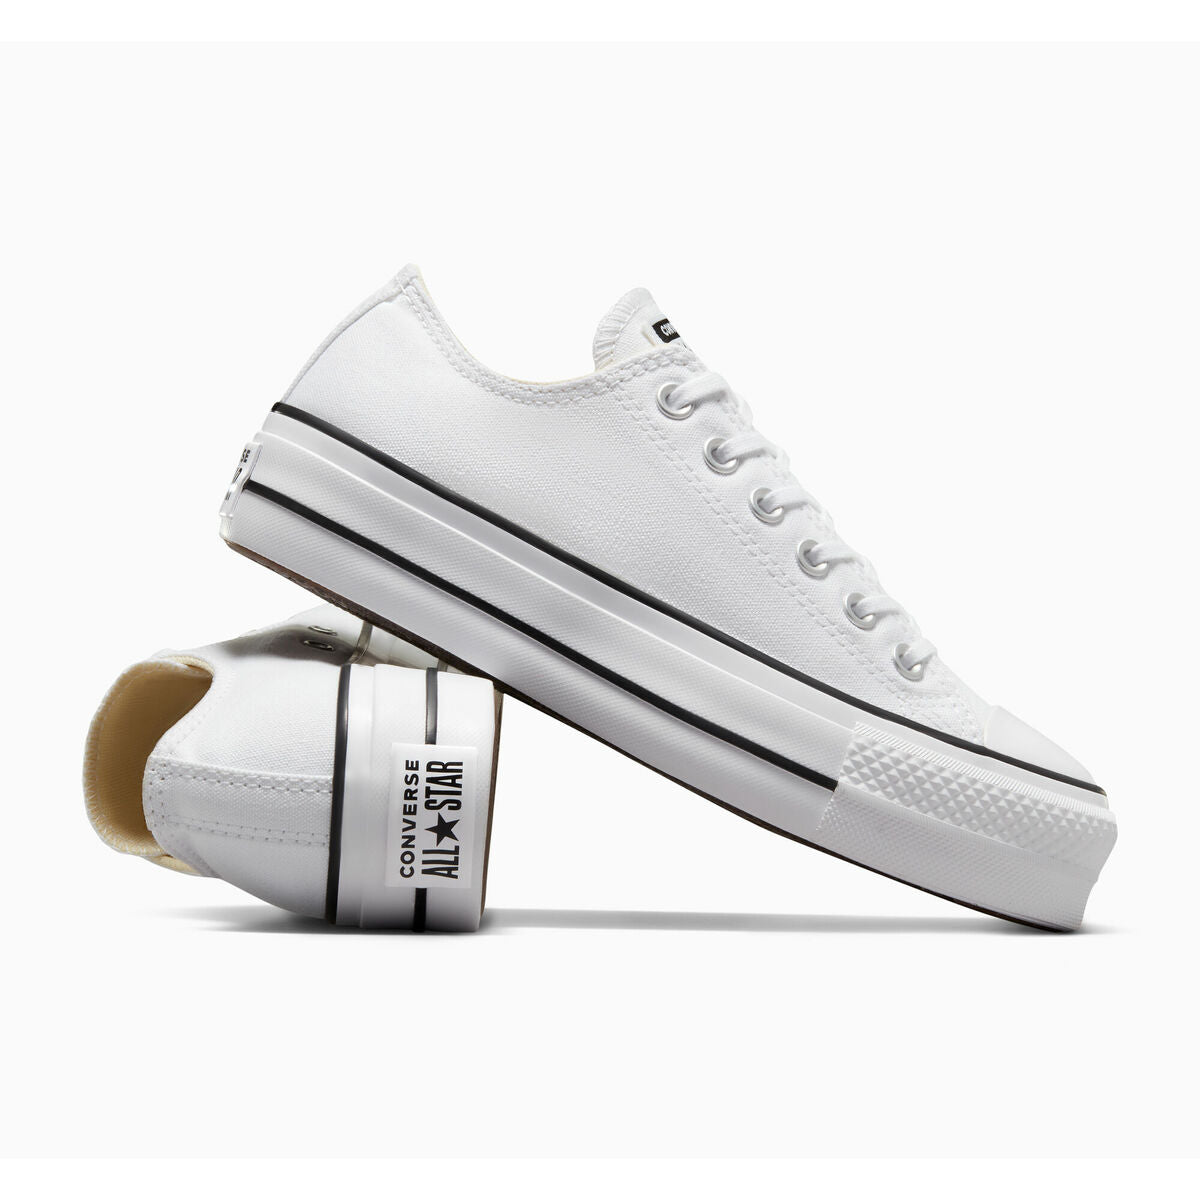 Sports Trainers For Women Converse White-Fashion | Accessories > Clothes and Shoes > Sports shoes-Converse-41-Urbanheer